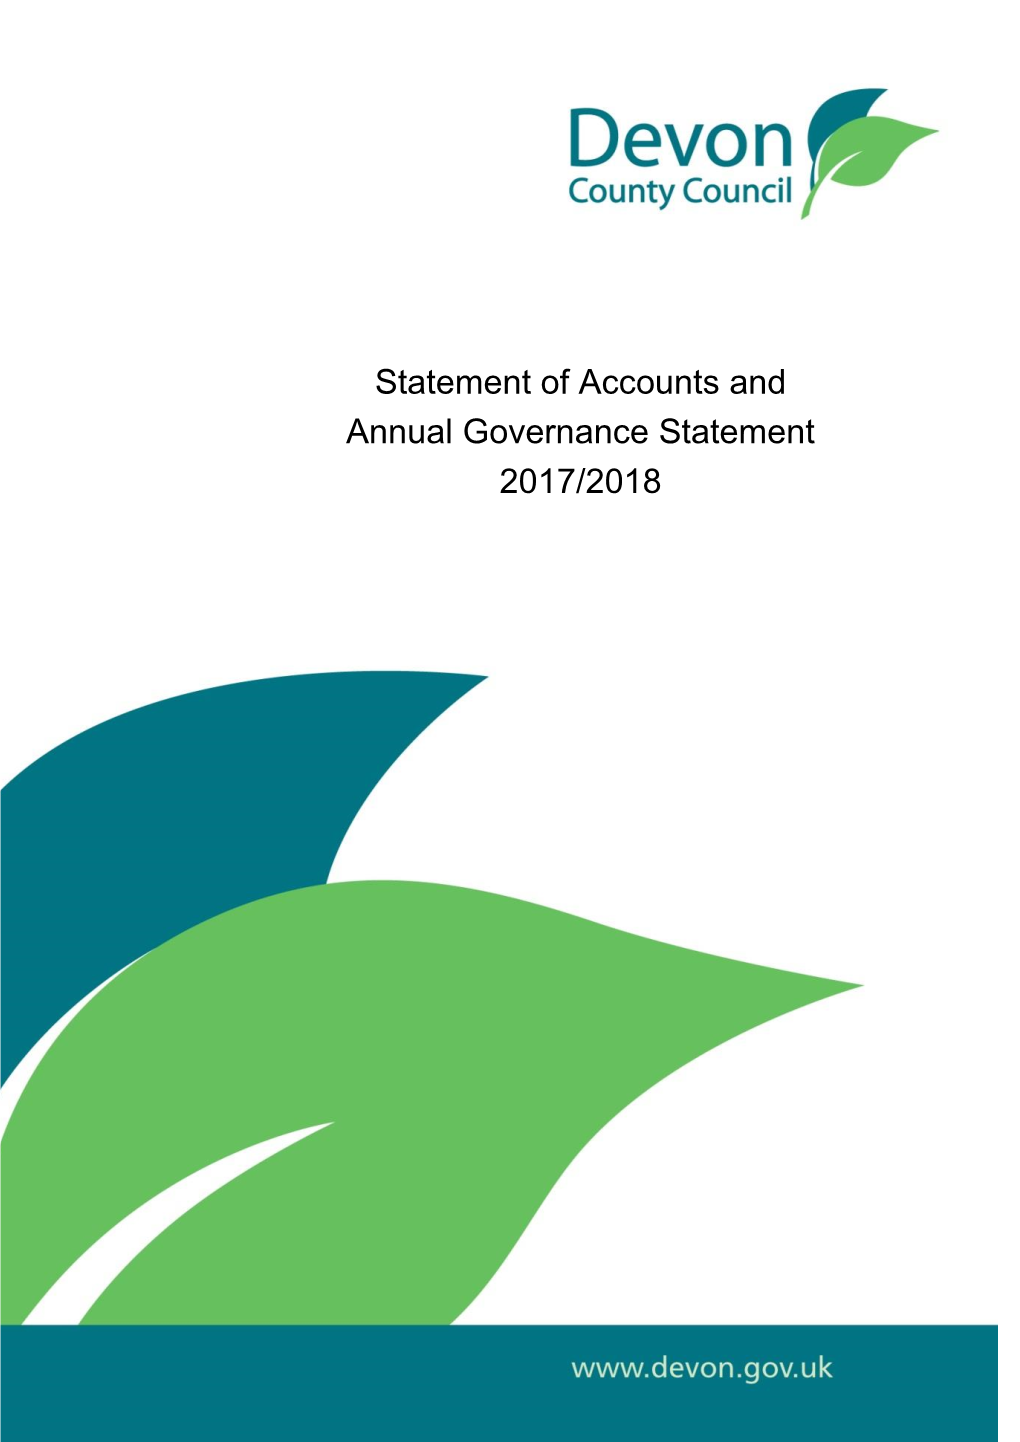 Statement of Accounts and Annual Governance Statement 2017/2018